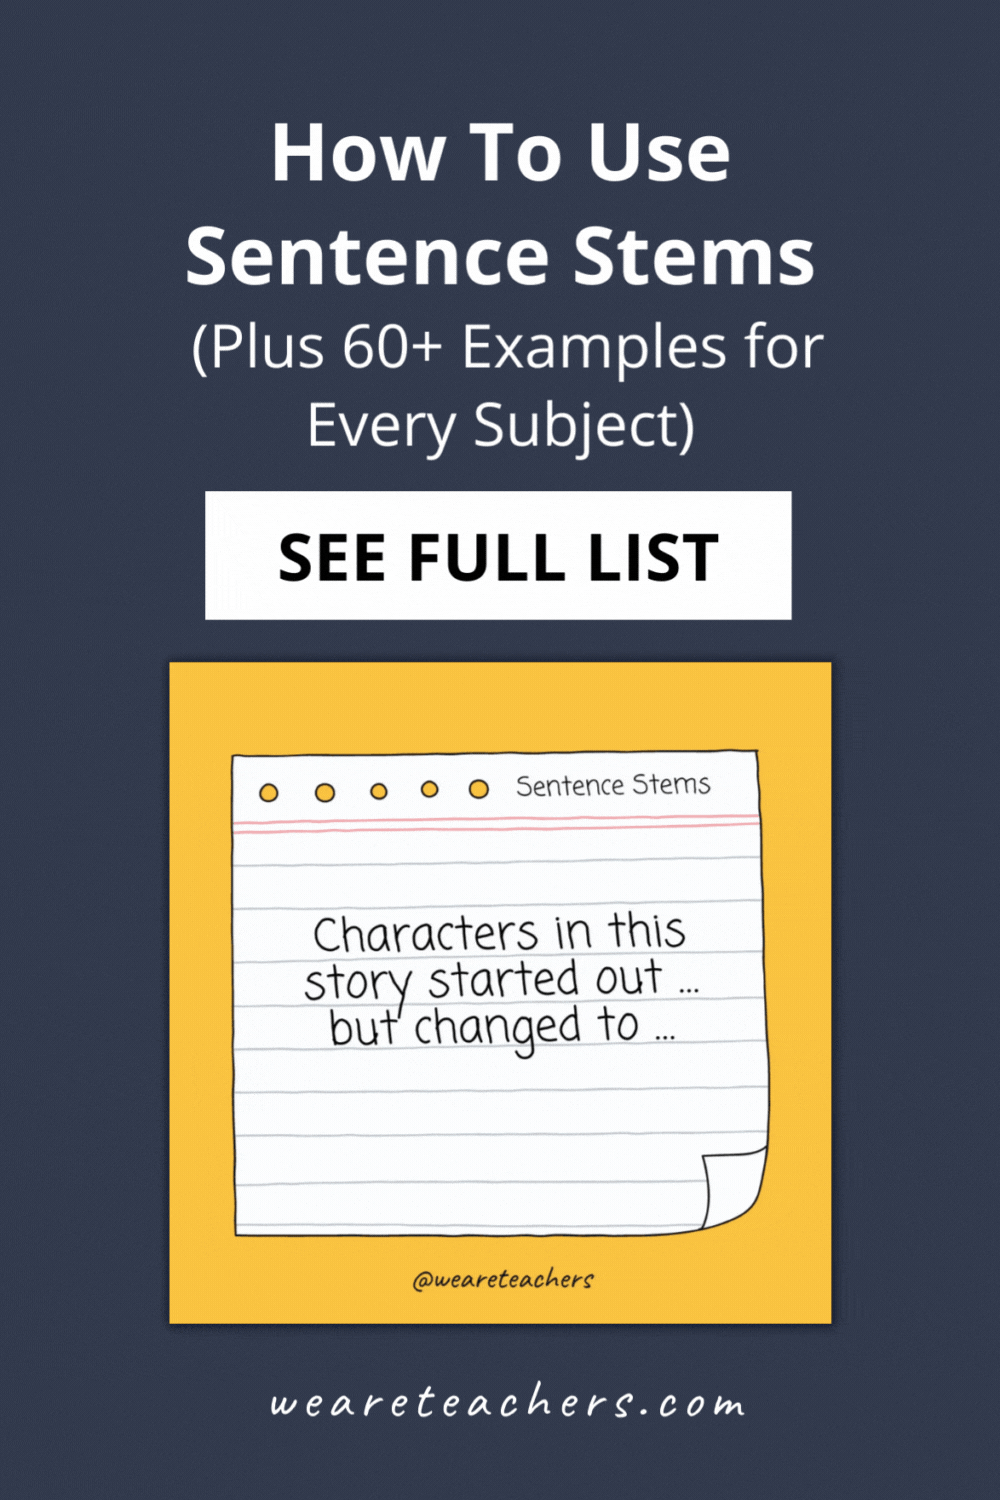 Sentence stems help students get started with writing or group discussions. You can use them for any subject, at any age.